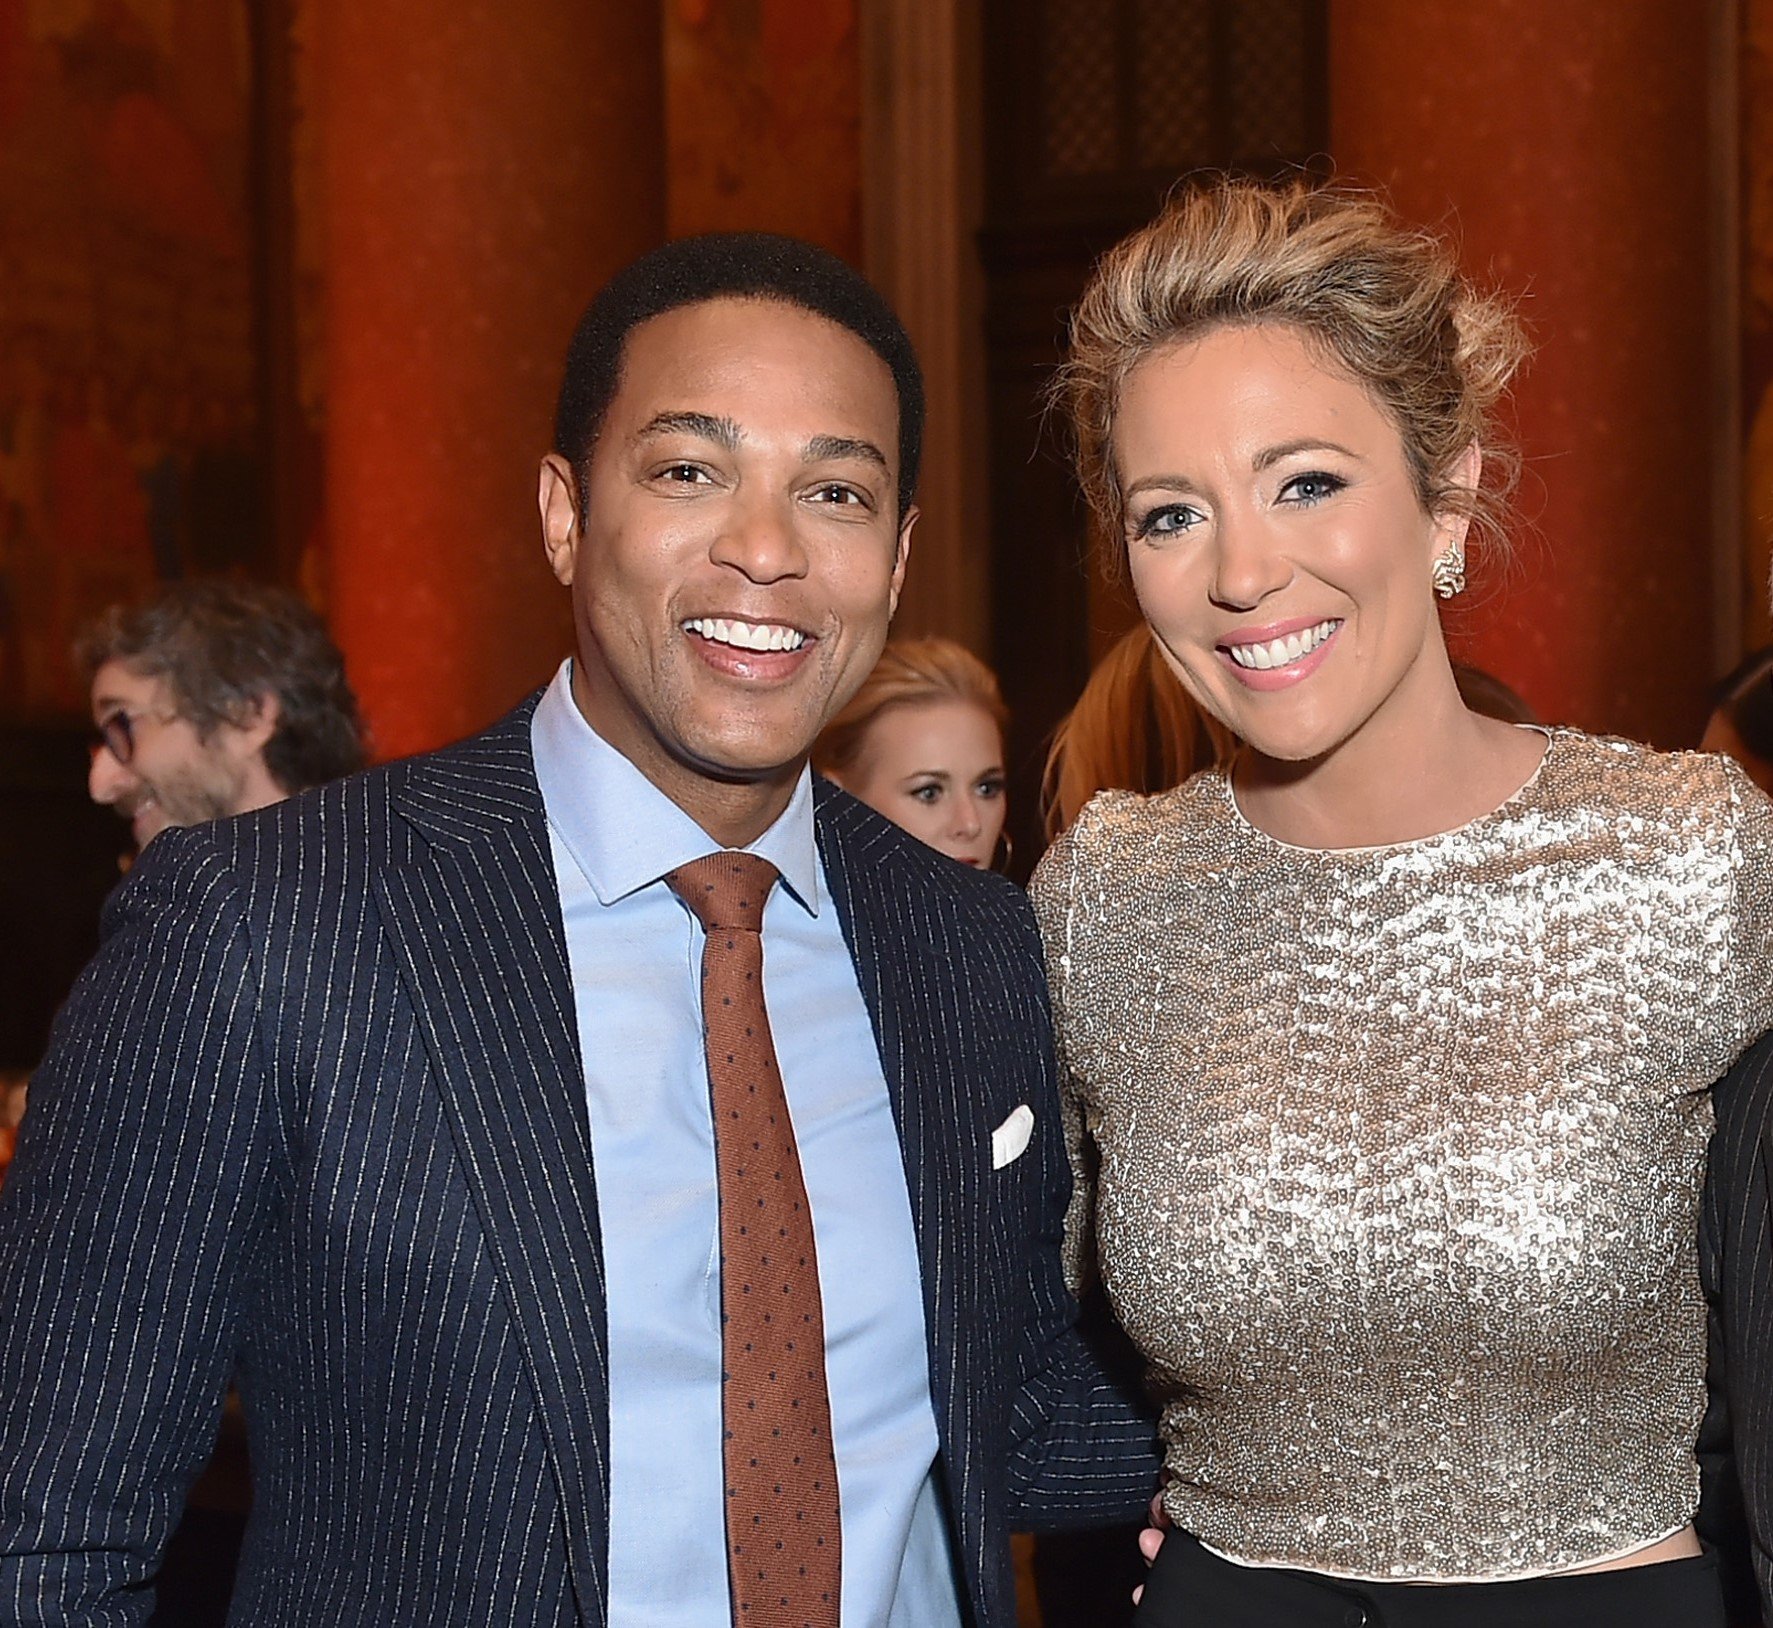 Don Lemon and Brooke Baldwin  pose for photo the American Museum of Natural History